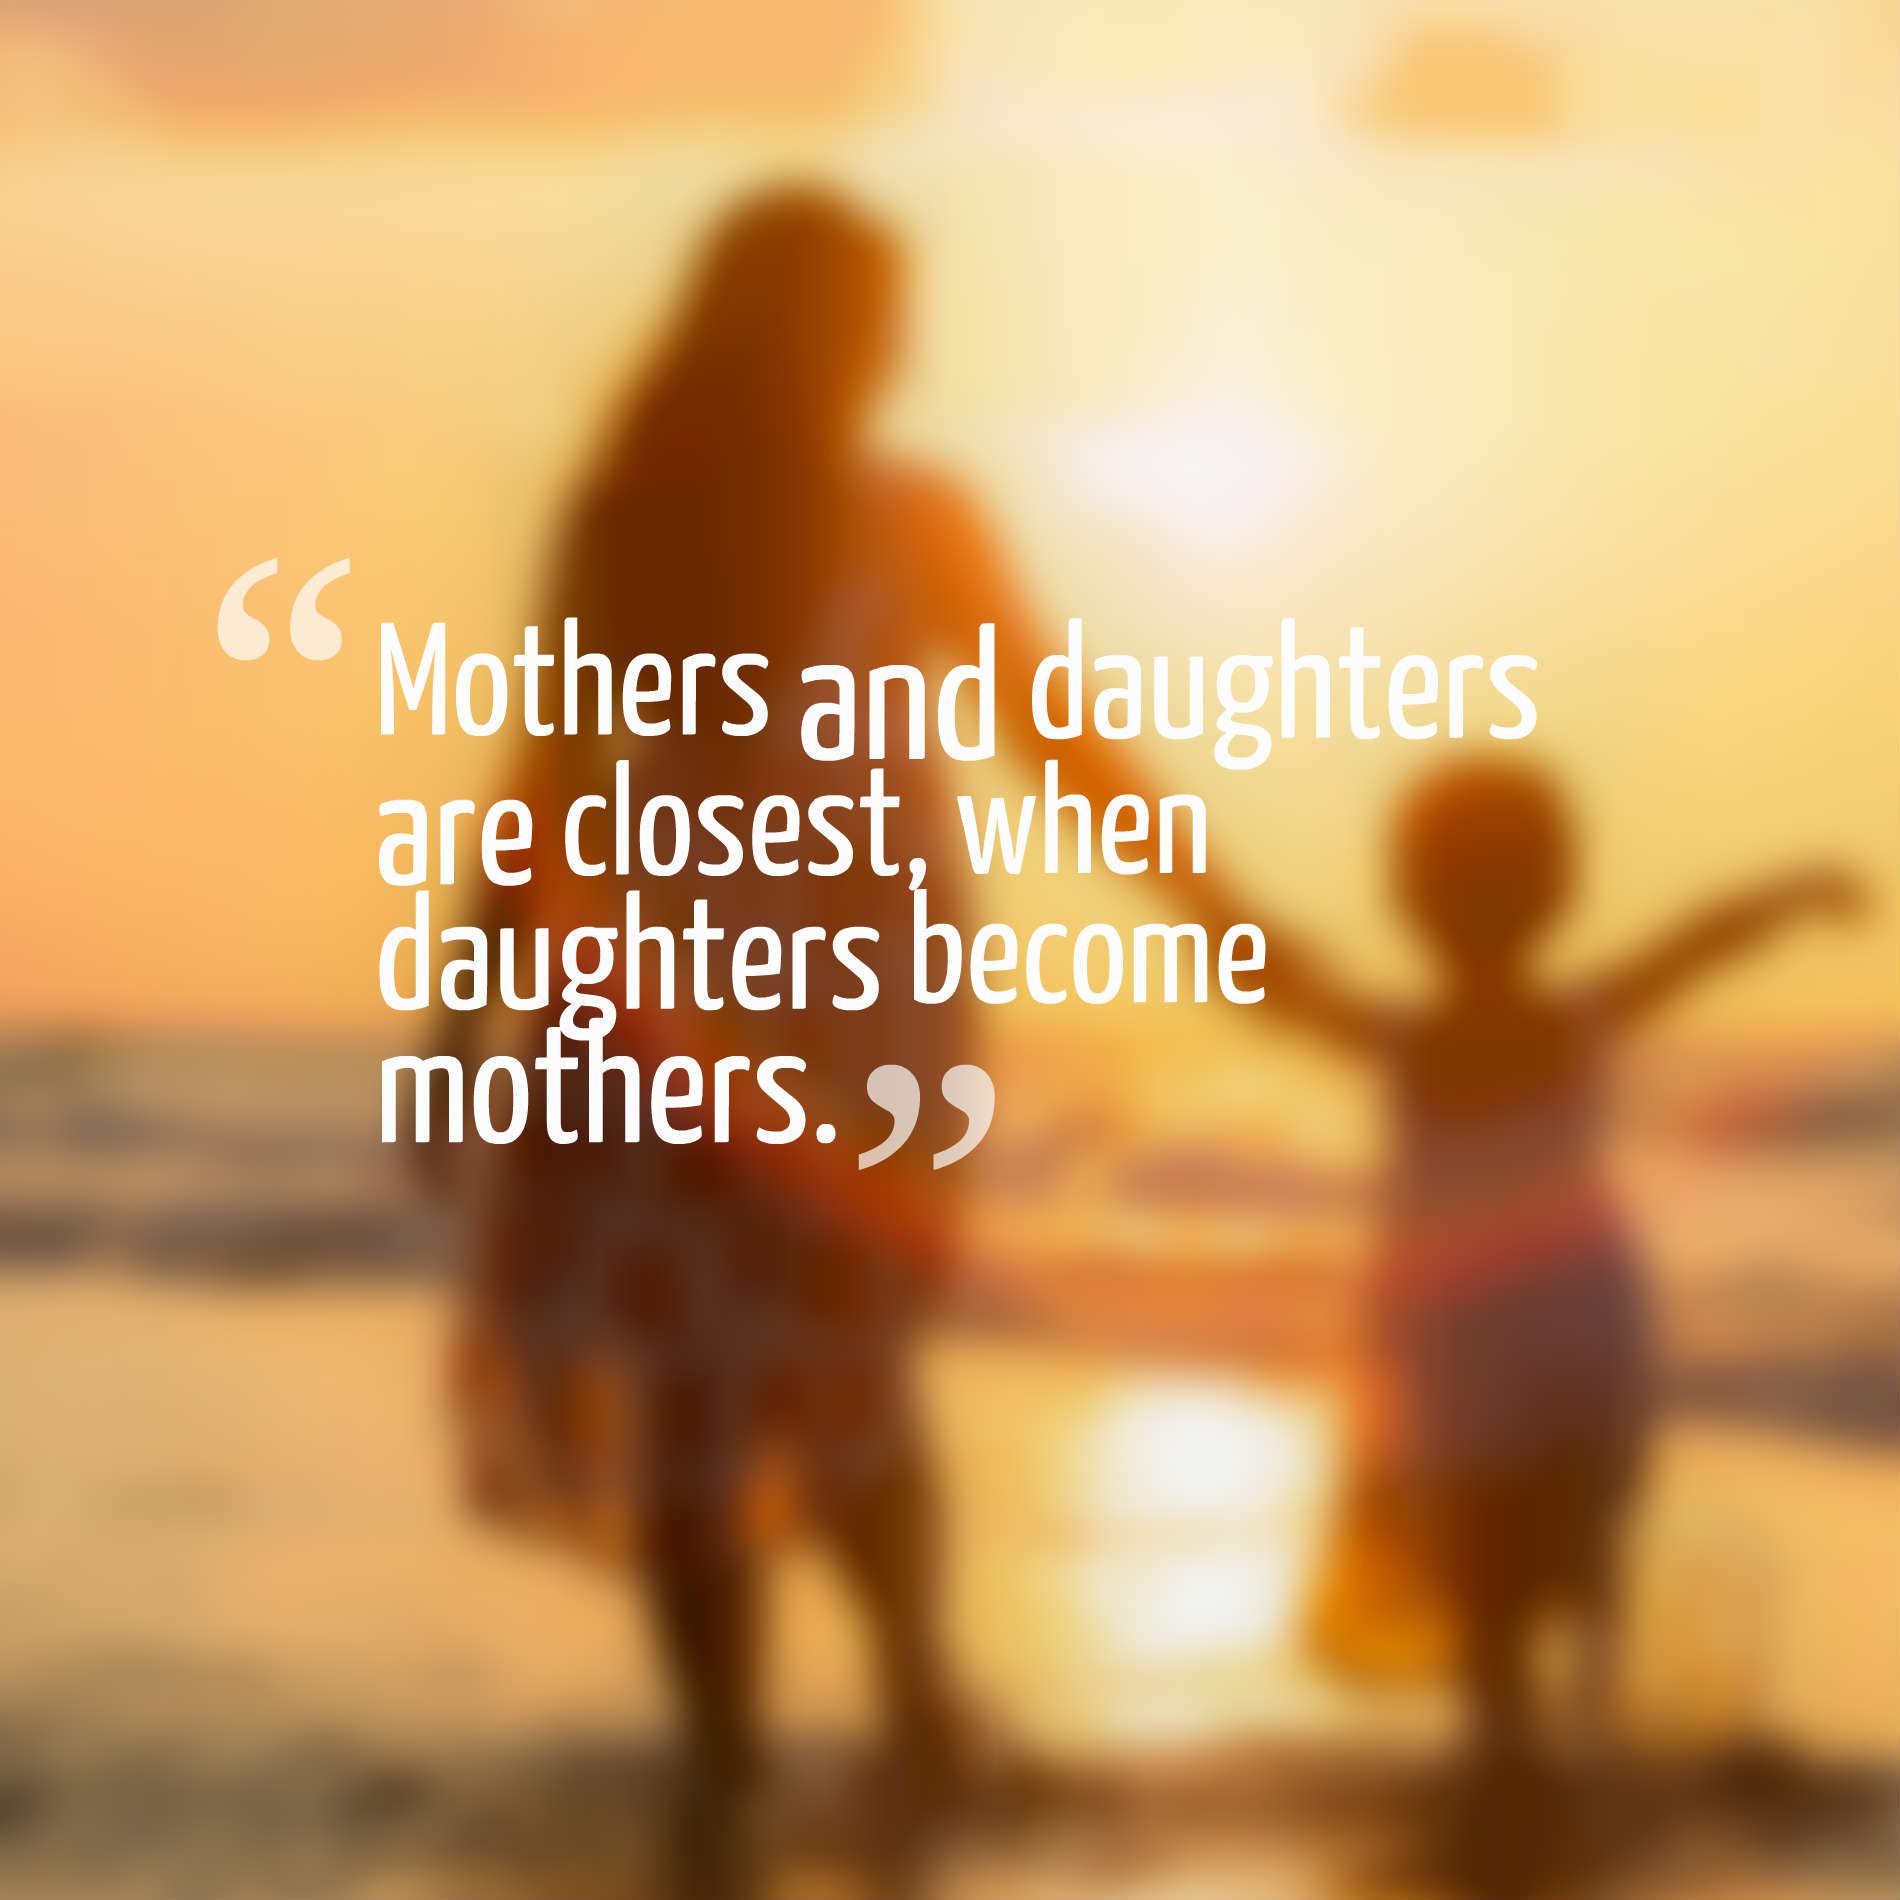 Mothers and daughters are closest, when daughters become mothers.